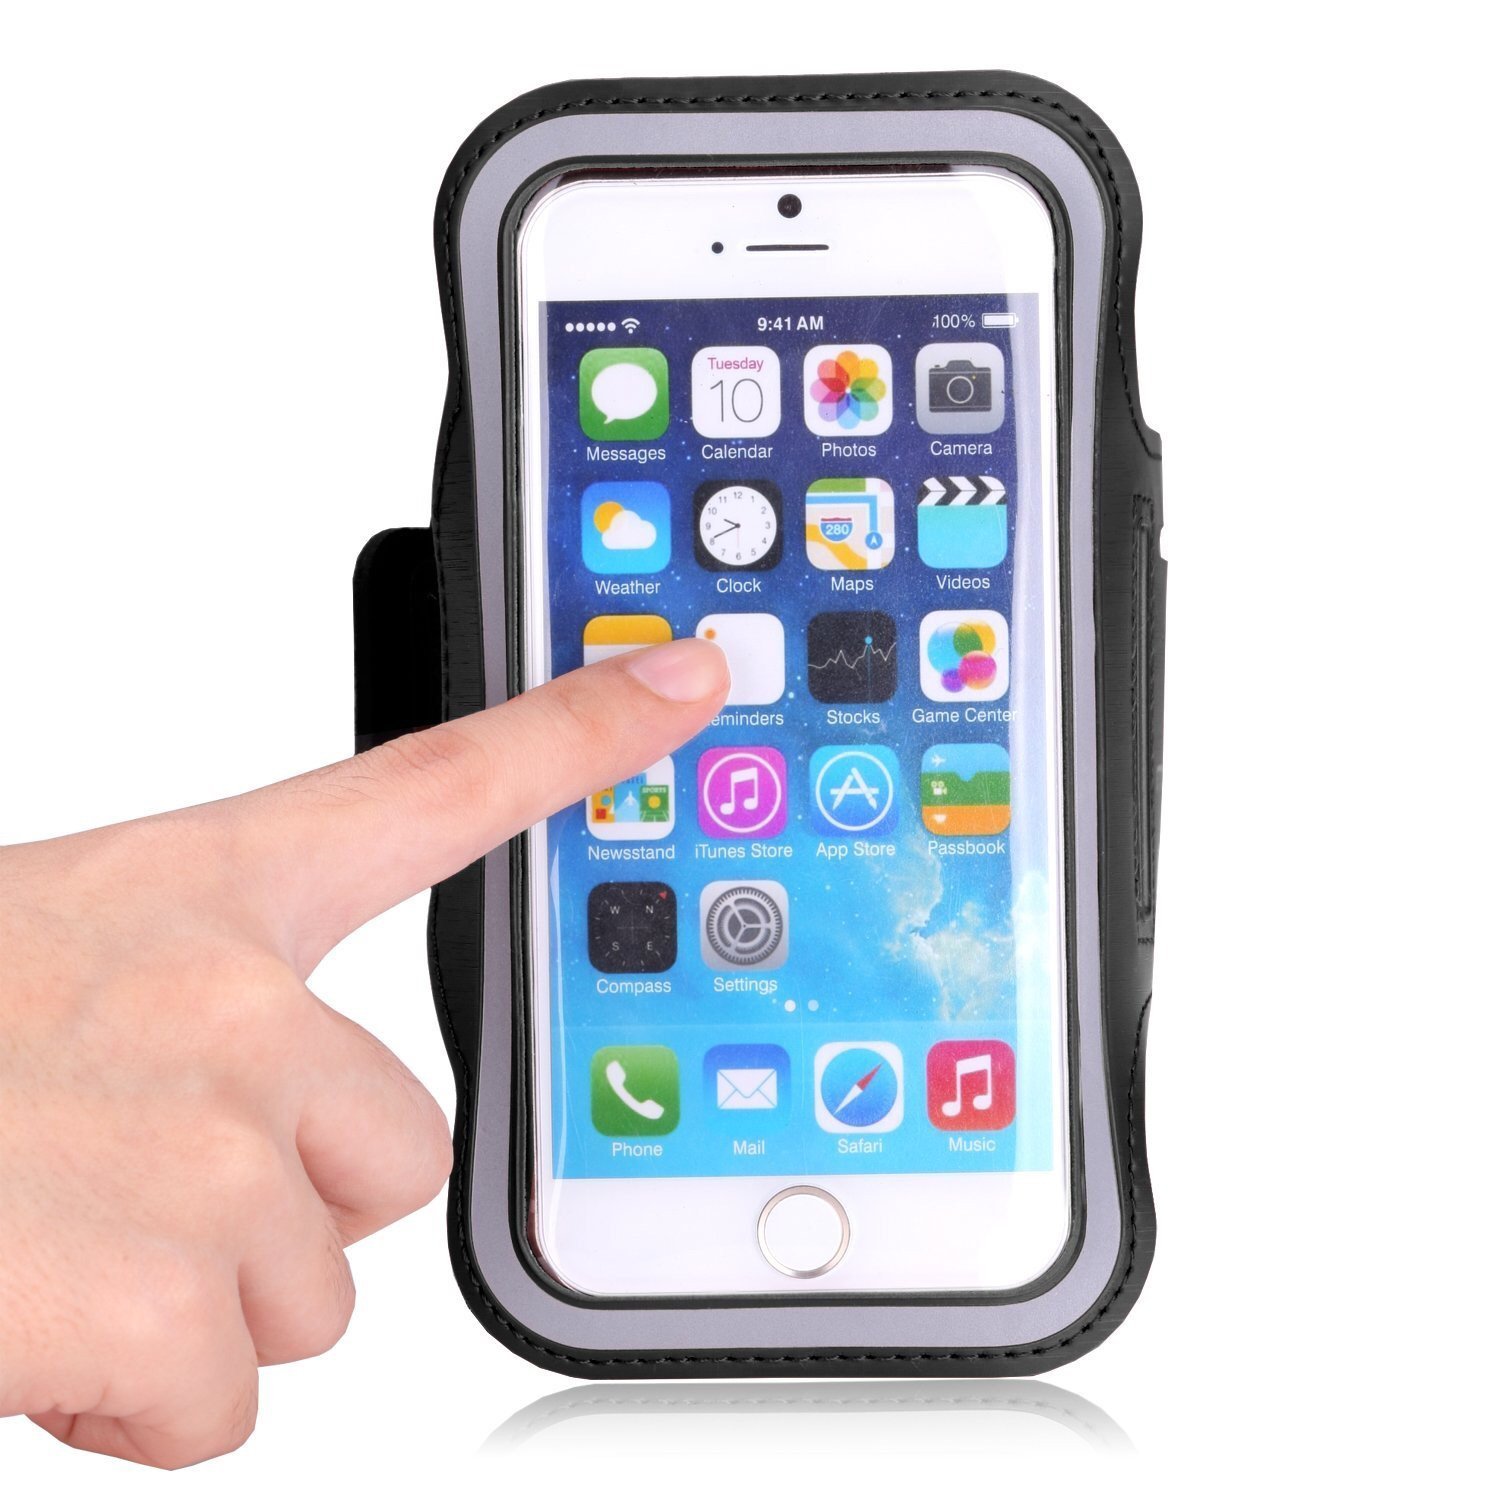 Universal-Sports-Elastic-Armband-Sweatproof-Touch-Screen-Mobile-Phone-Arm-Bags-with-Earphone-Port-fo-1890480-2